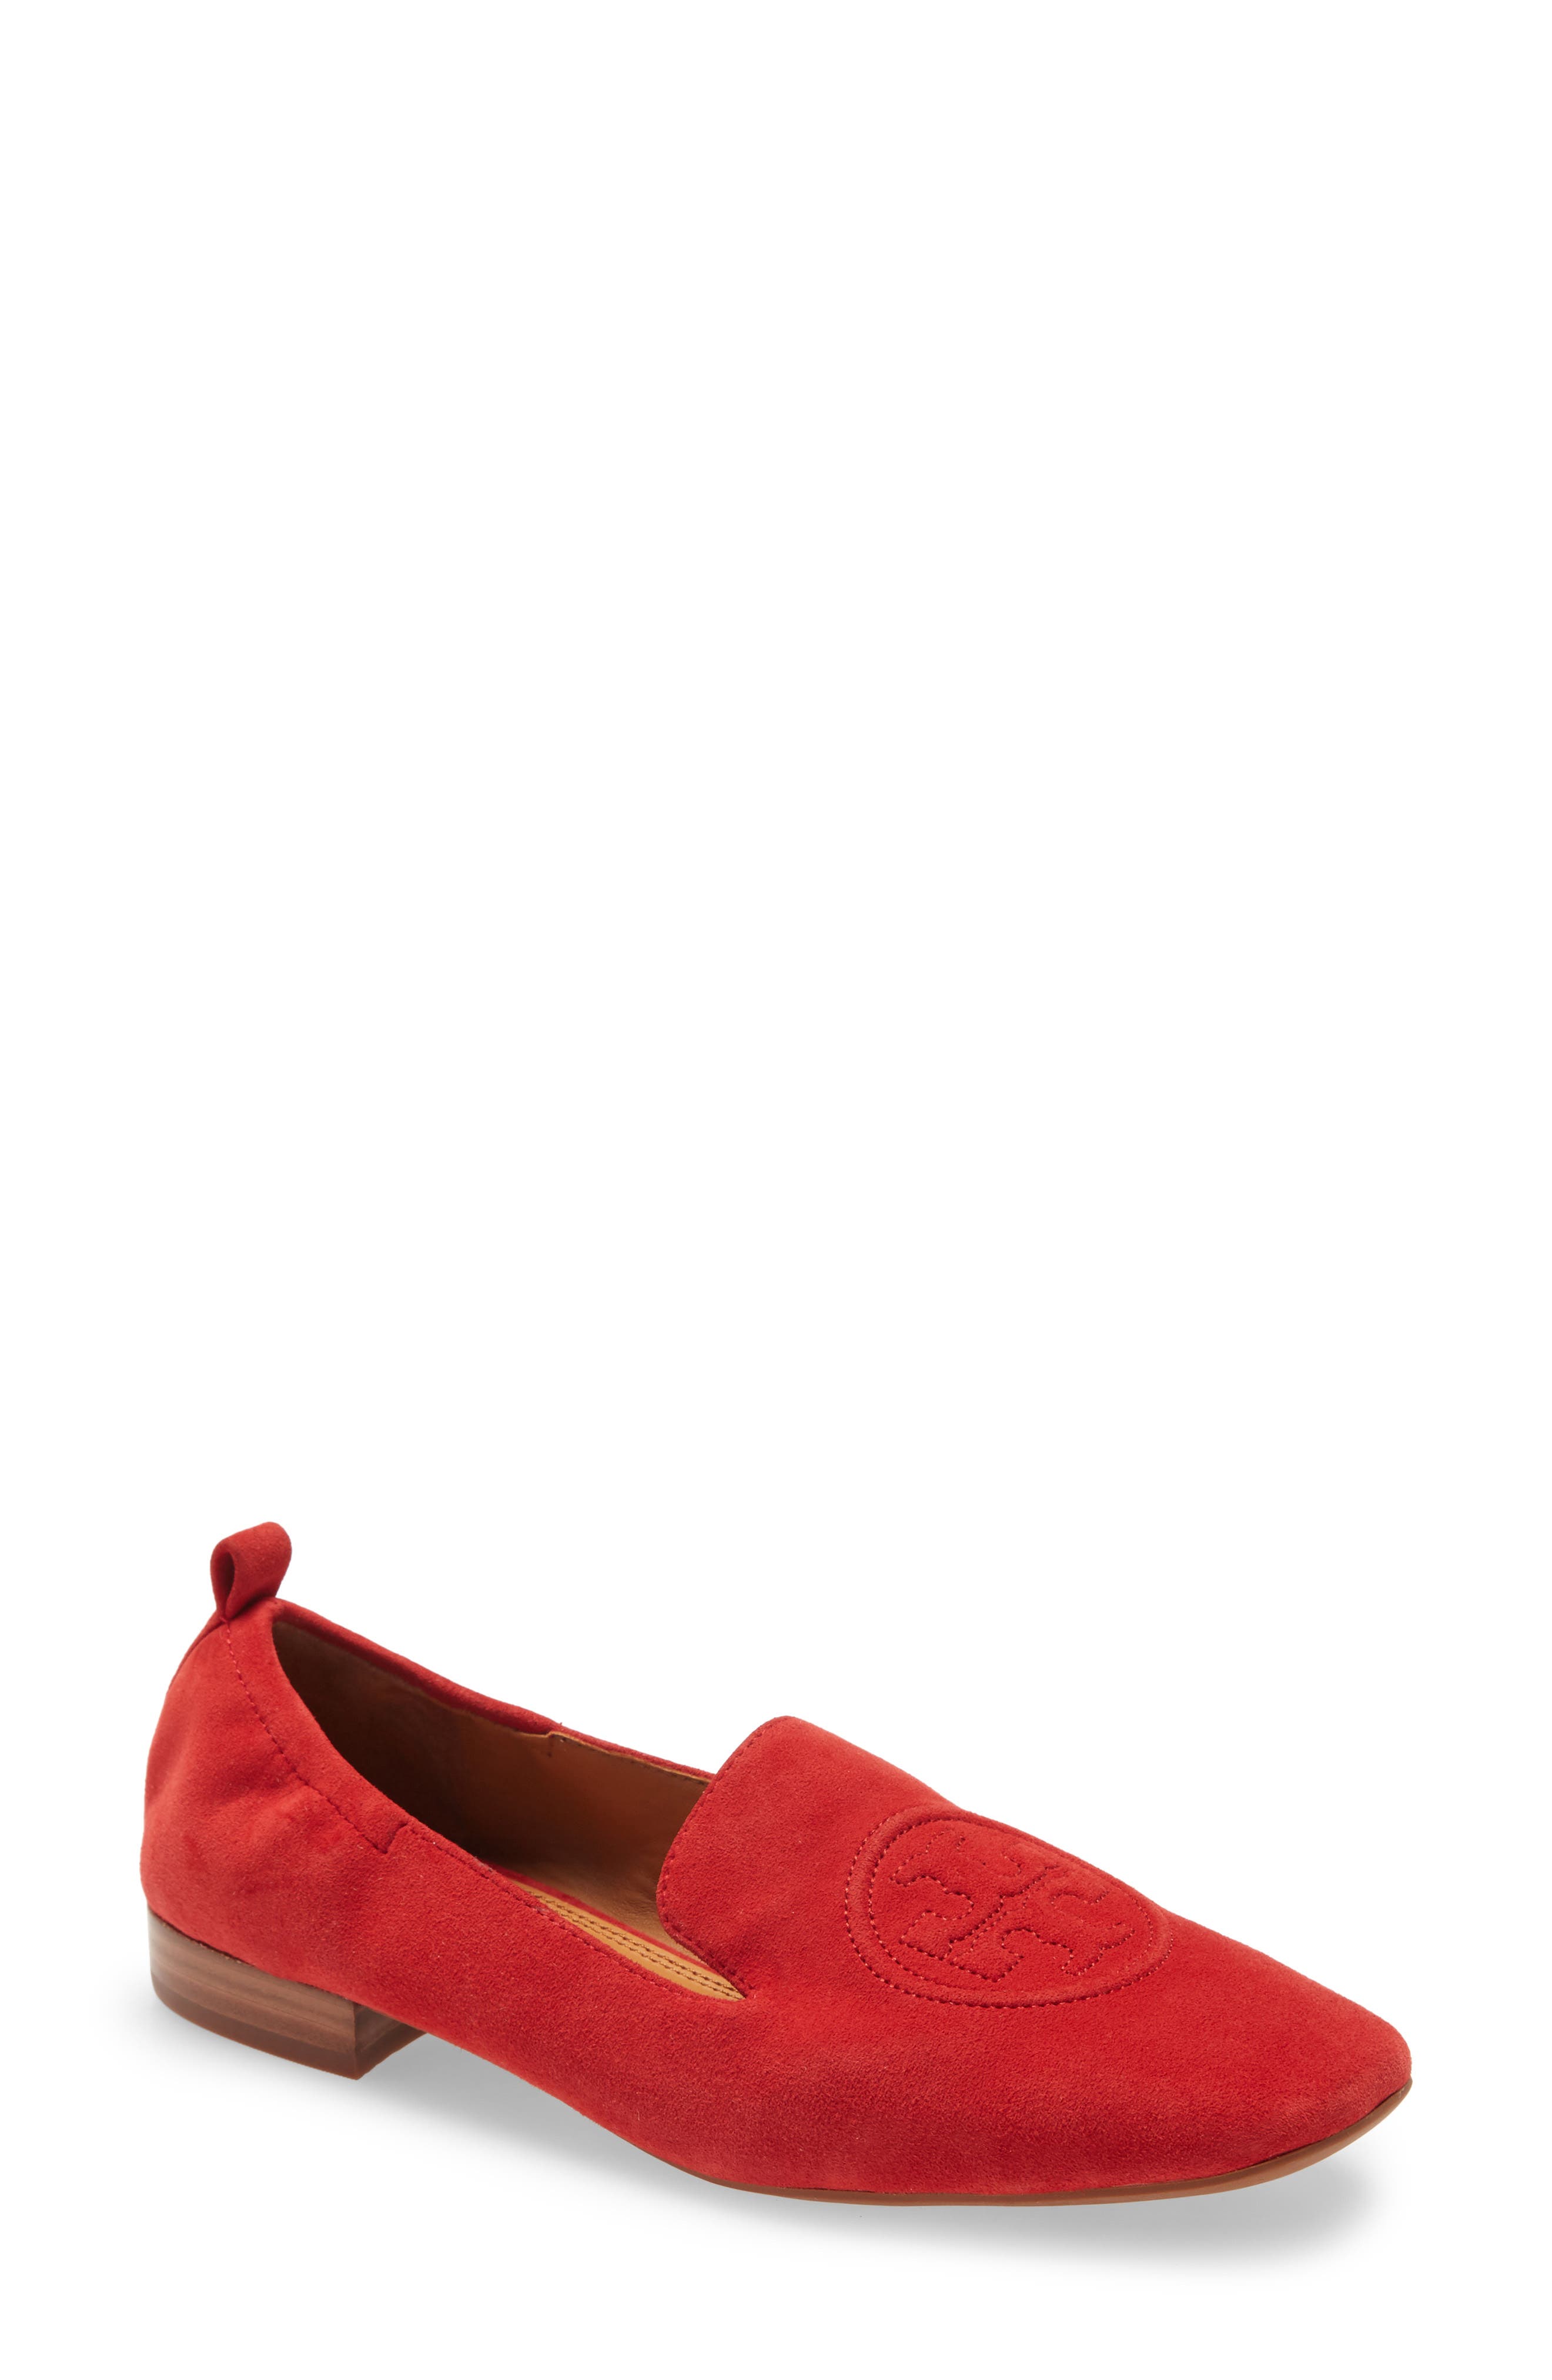 red flats nordstrom